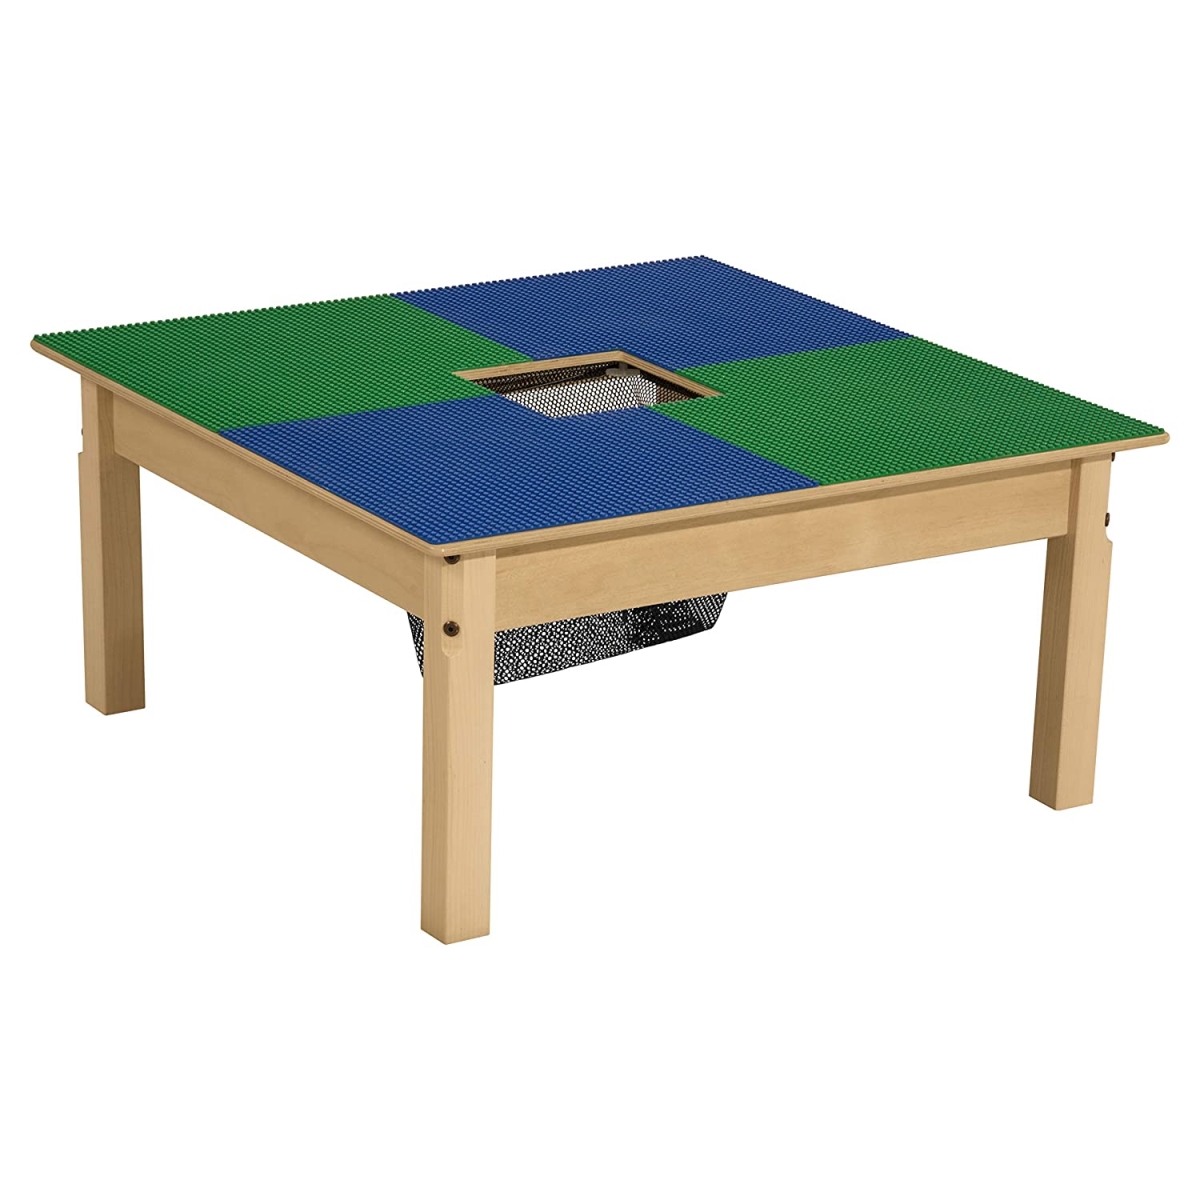 Tp3131sgn14-bg 14 In. Lego Compatible Table With Legs, Blue & Green - Square